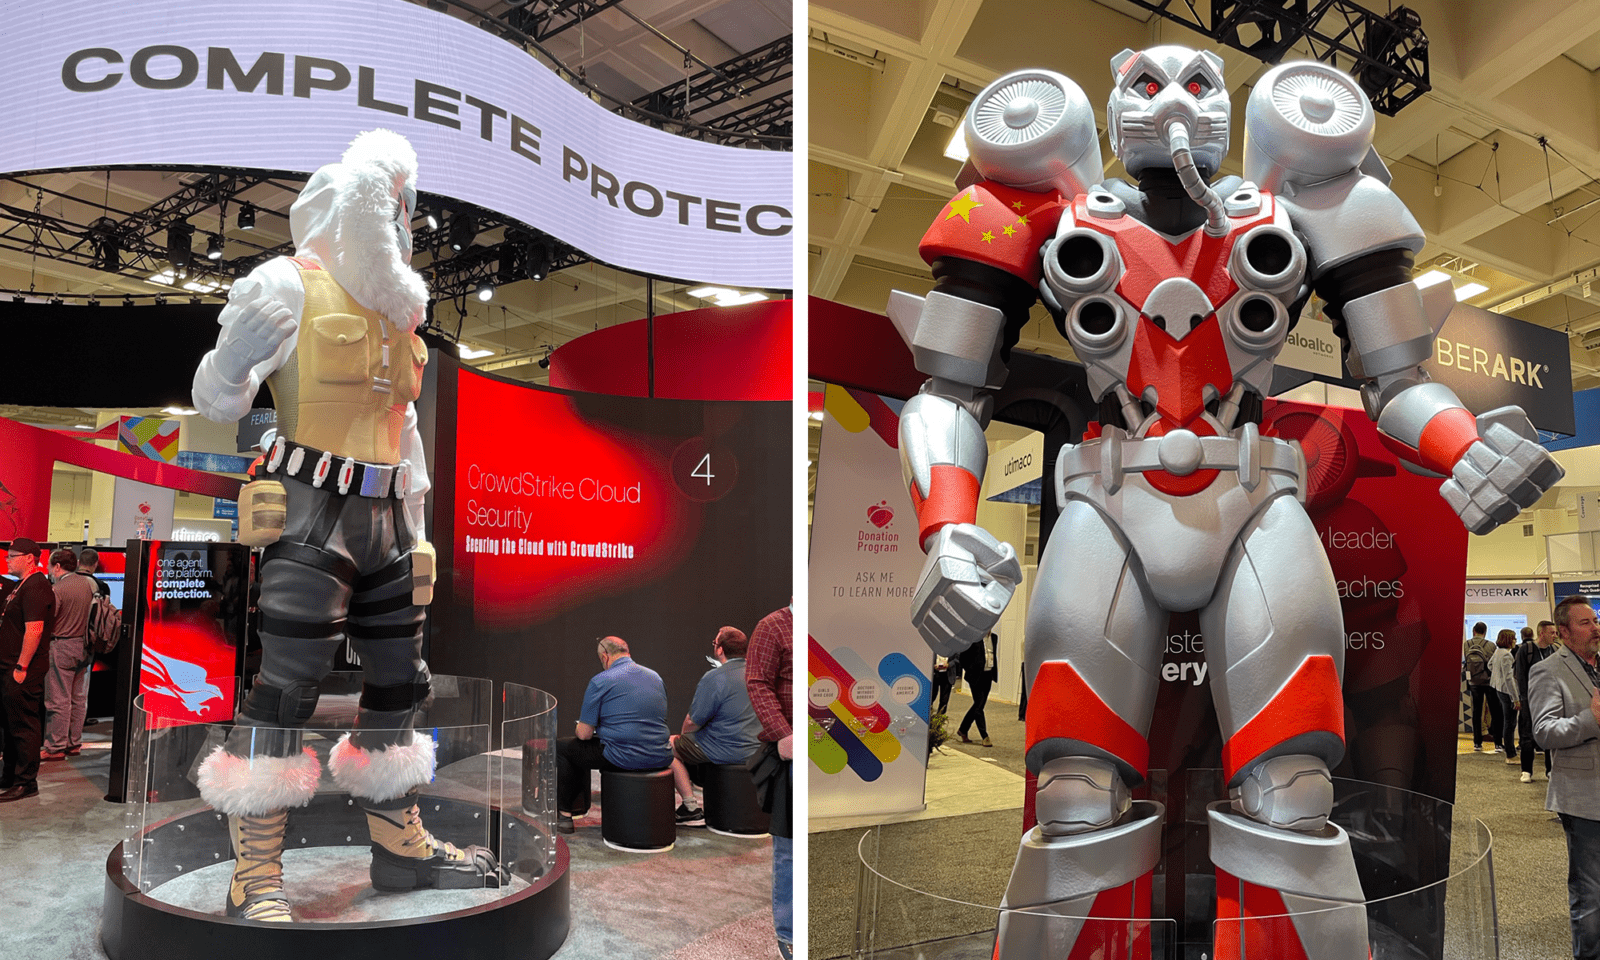 CrowdStrike's booth featured larger-than-life character statues